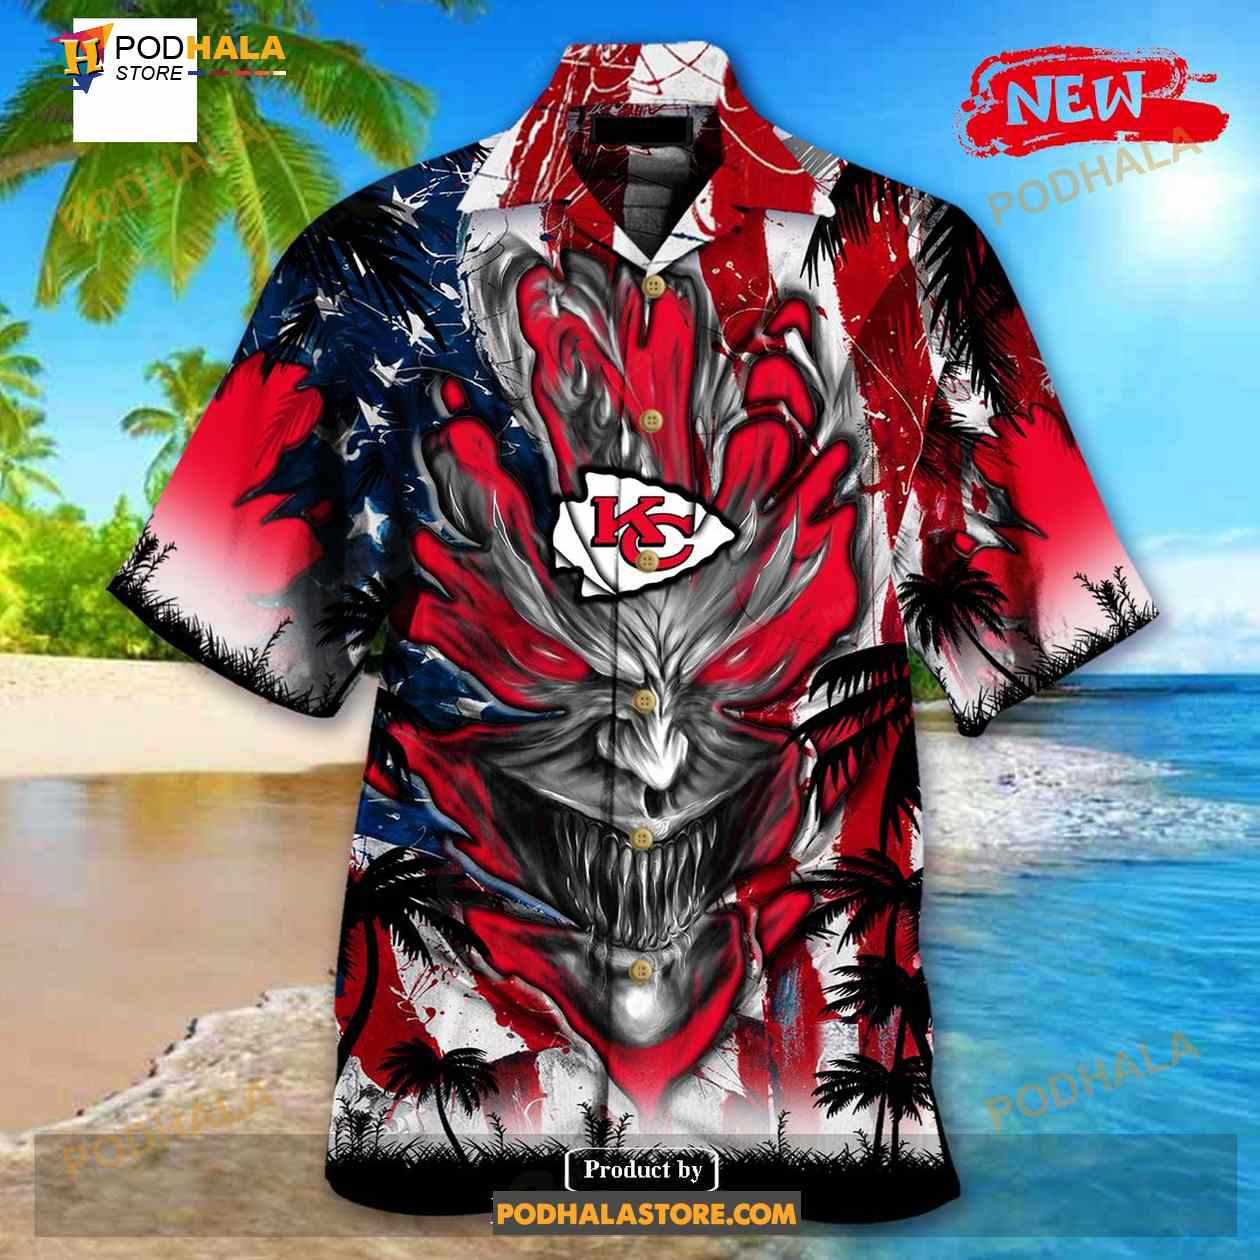 Personalized Name NFL Hawaiian Shirt, NFL New York Giants Special